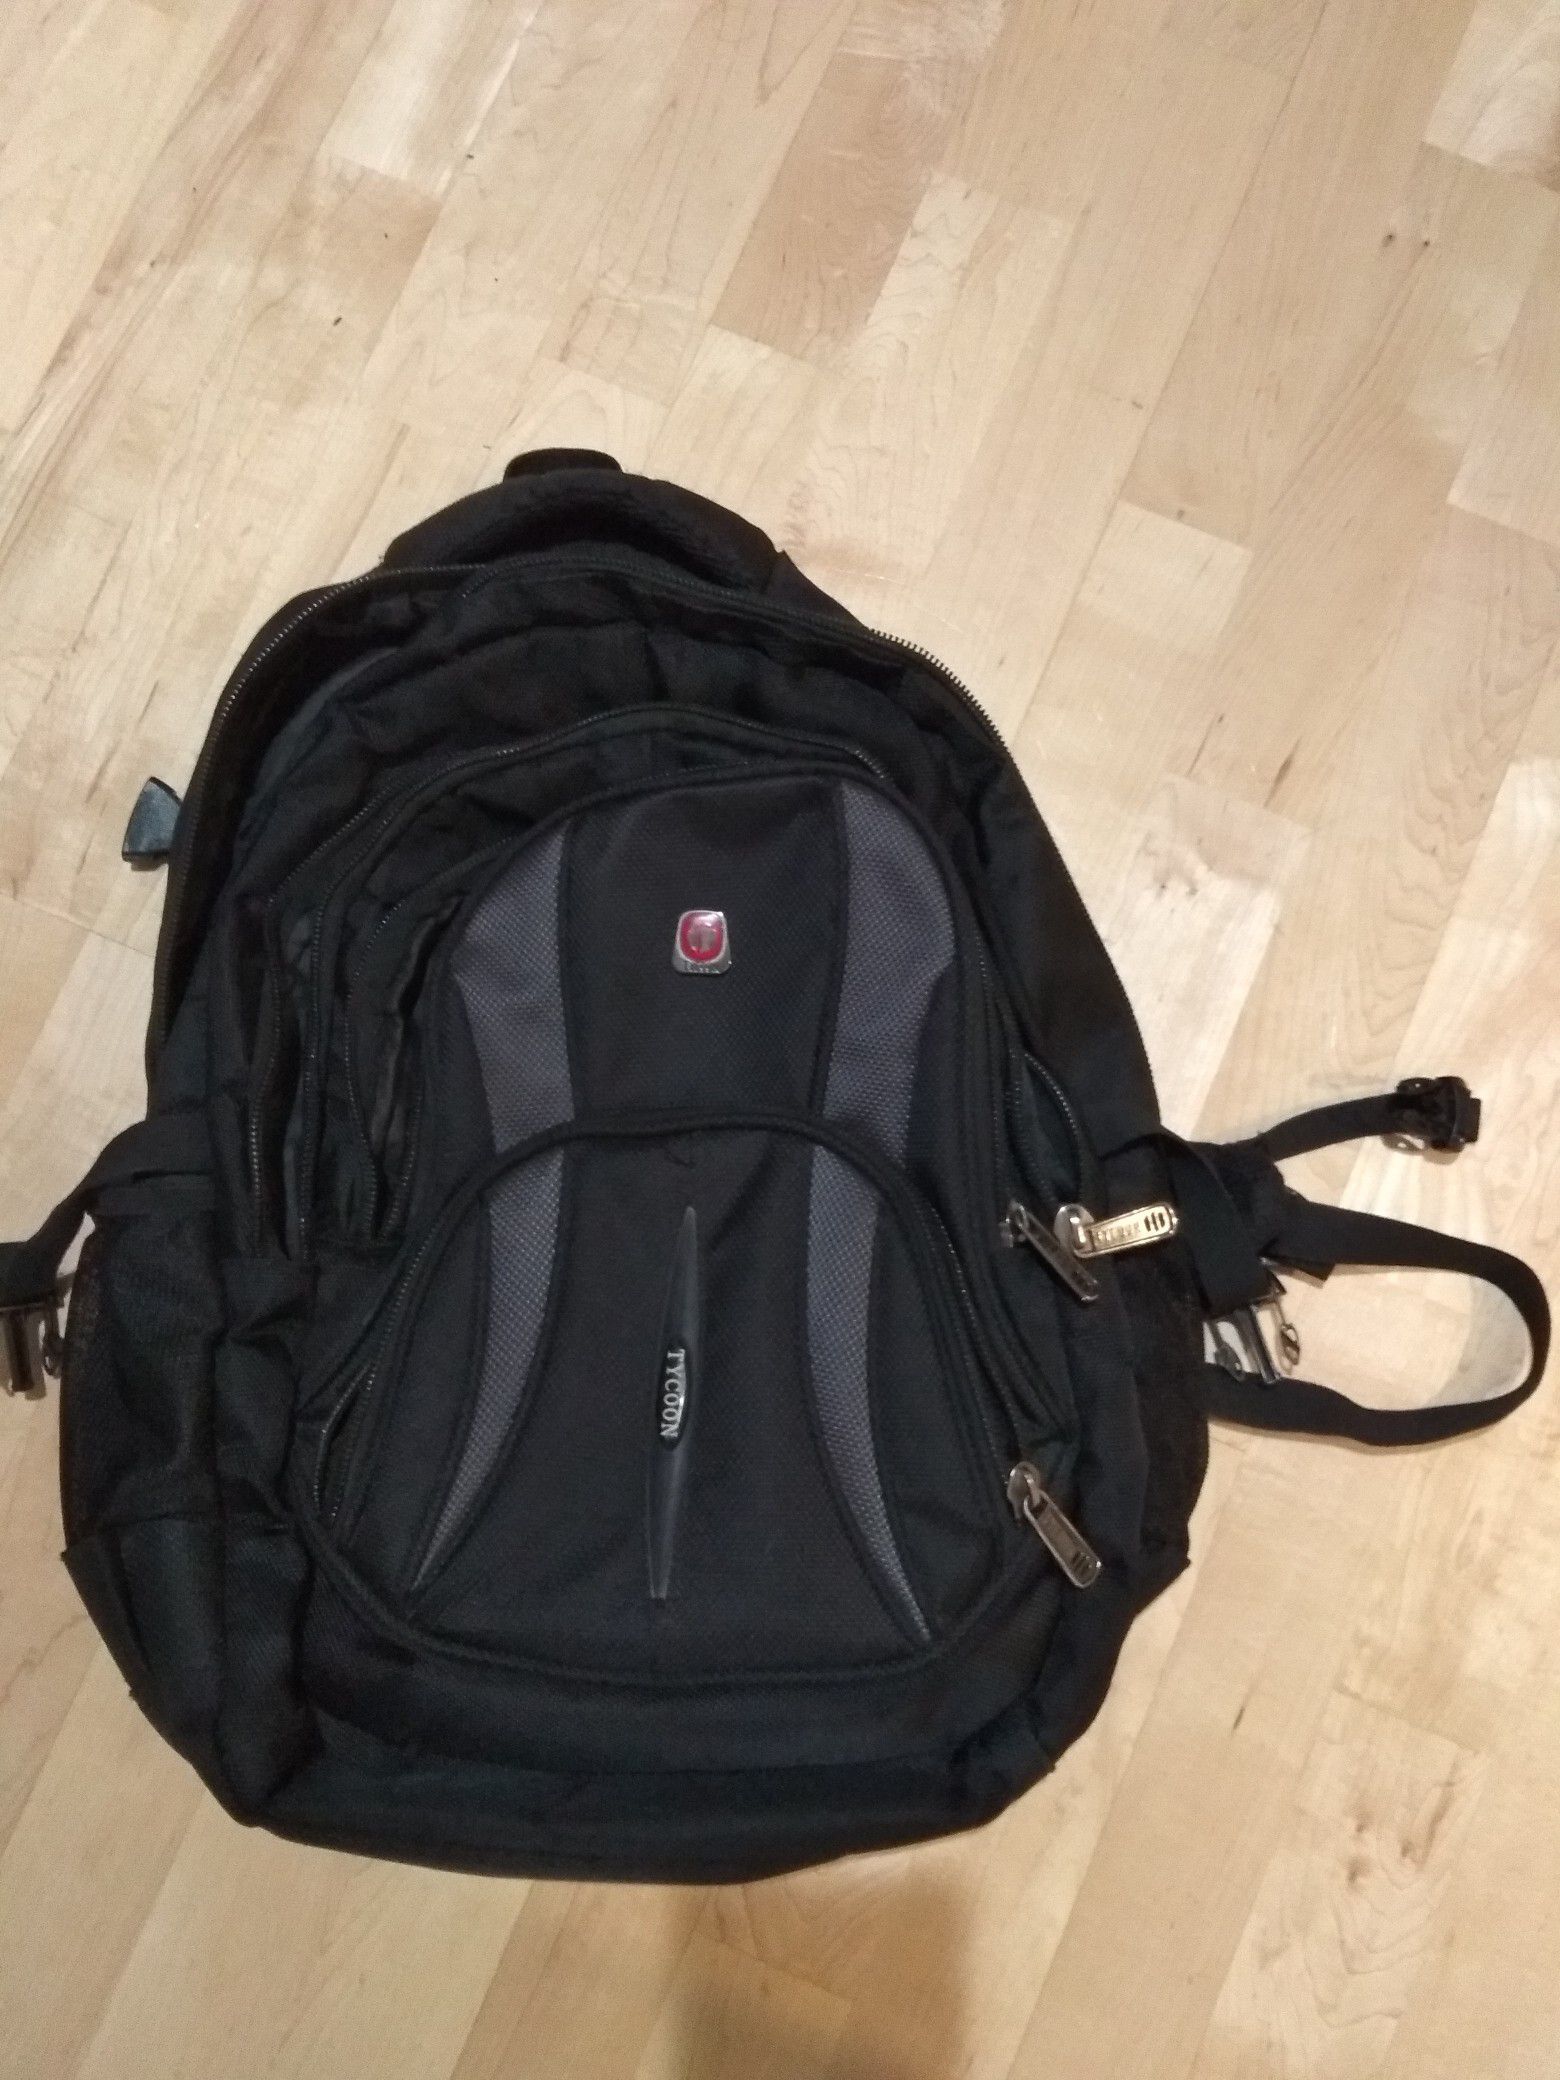 17 inch laptop backpack with several compartments